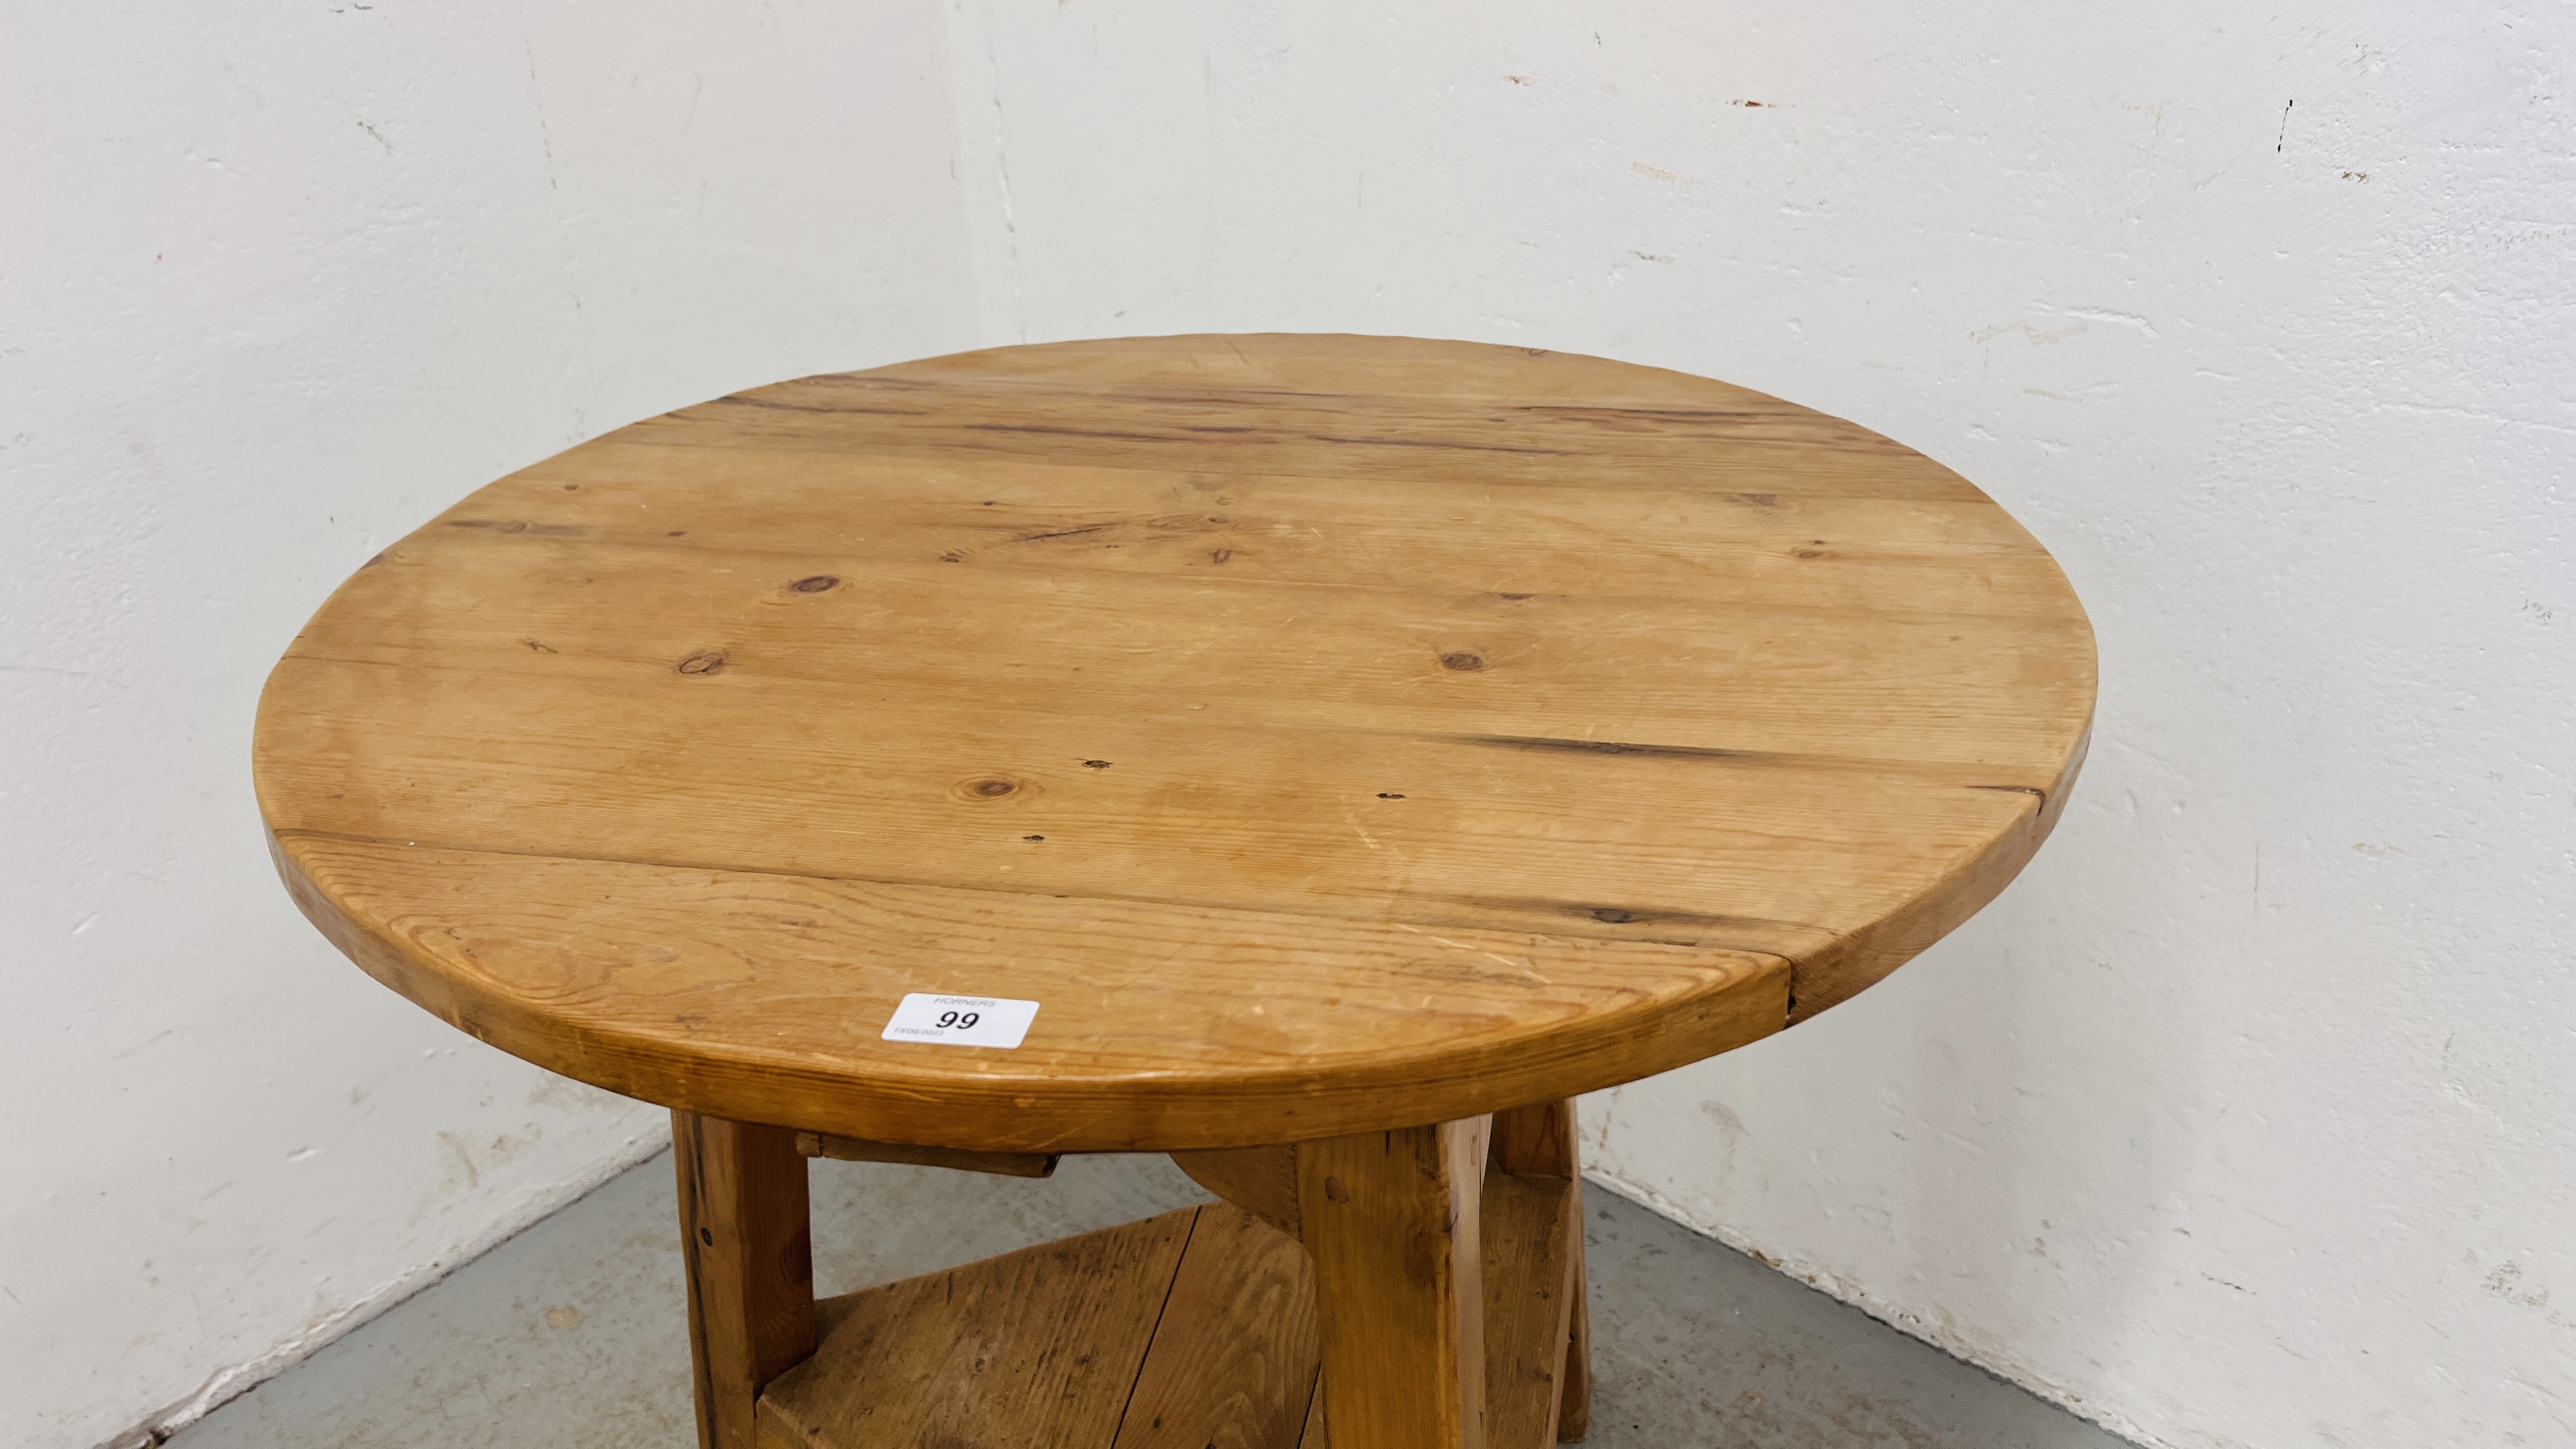 A VINTAGE PINE CIRCULAR TRI LEGGED OCCASIONAL TABLE WITH LOWER SHELF 72CM D X 72CM H ALONG WITH A - Image 8 of 10